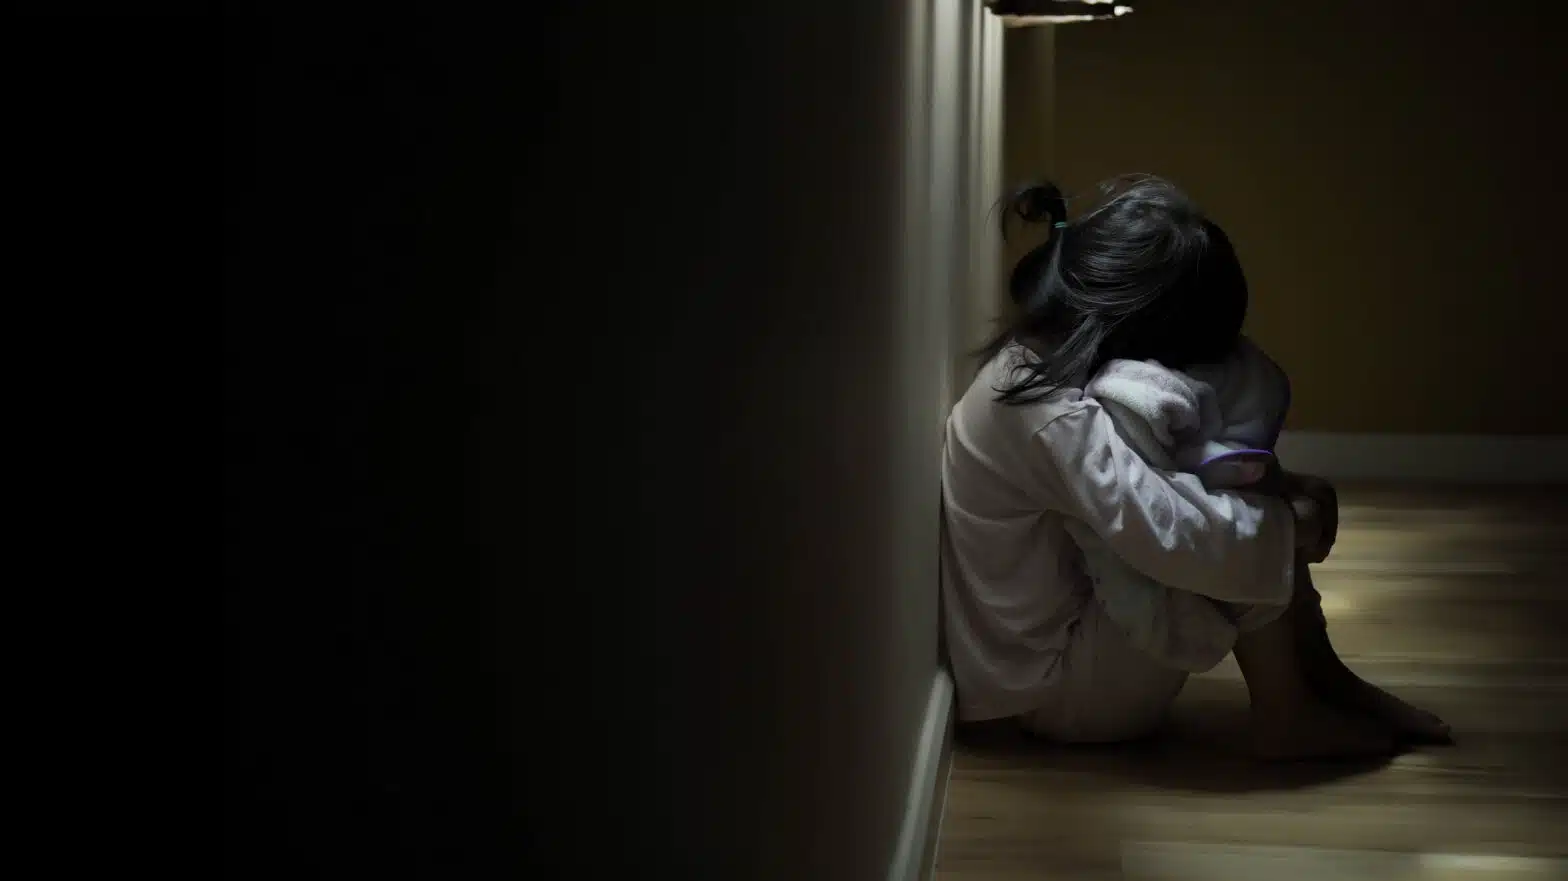 A young girl sits alone on the floor of a dark hallway - Substance Abuse In The Foster Care System